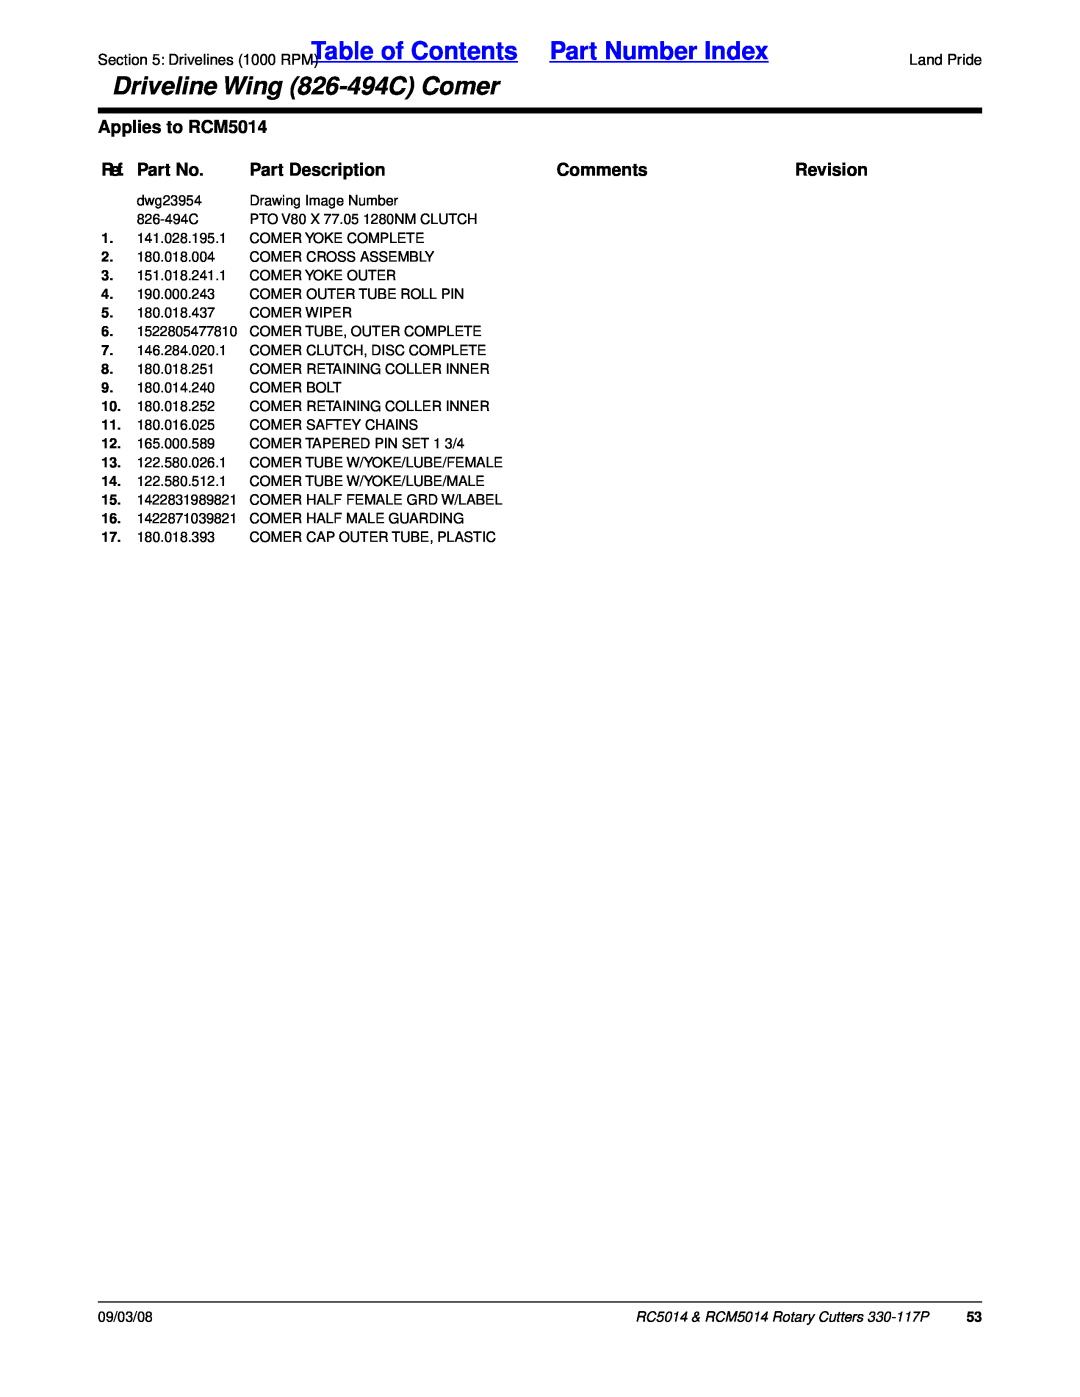 Land Pride RC5014 Table of Contents, Part Number Index, Driveline Wing 826-494CComer, Applies to RCM5014, Ref. Part No 